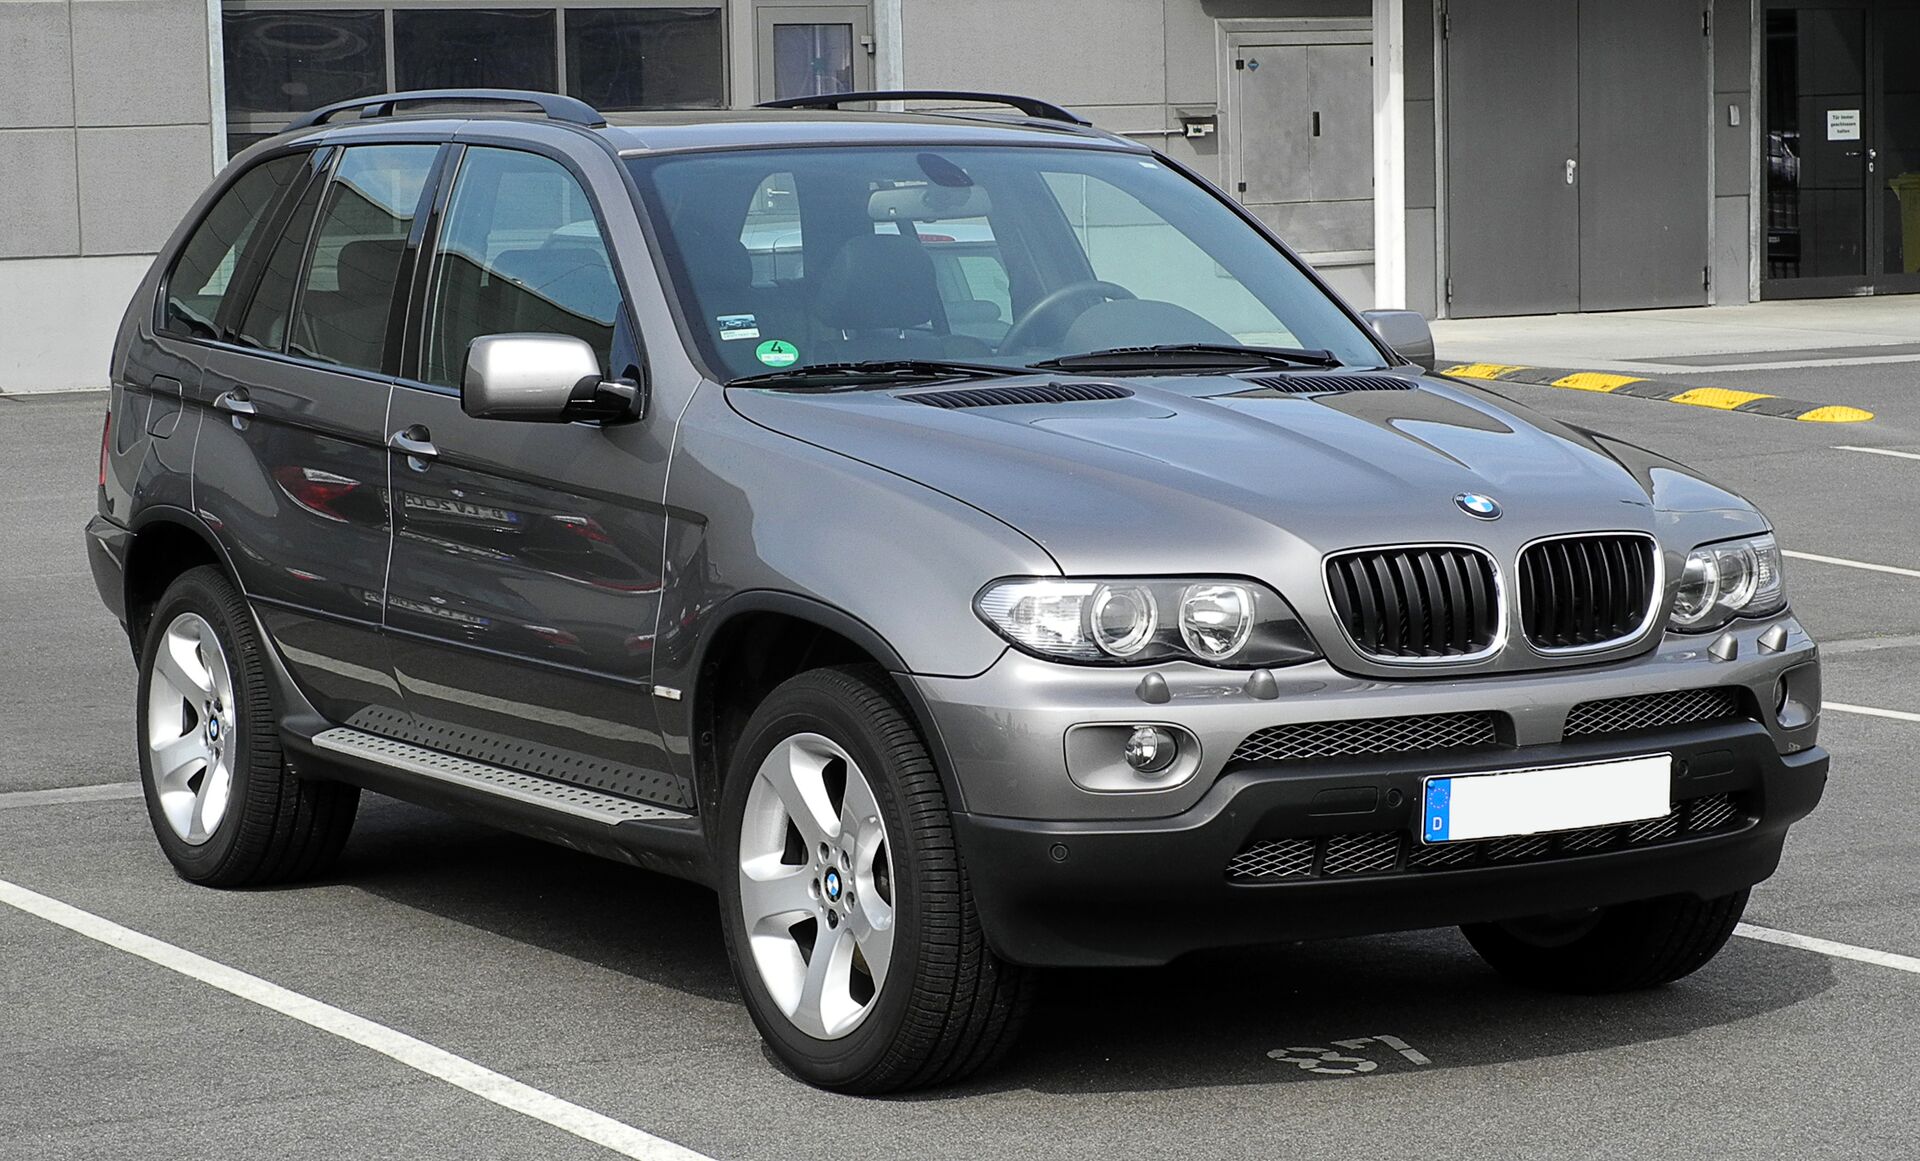 BMW X5 (E53, facelift 2003) 2003 - 2006 Specs and Technical Data, Fuel